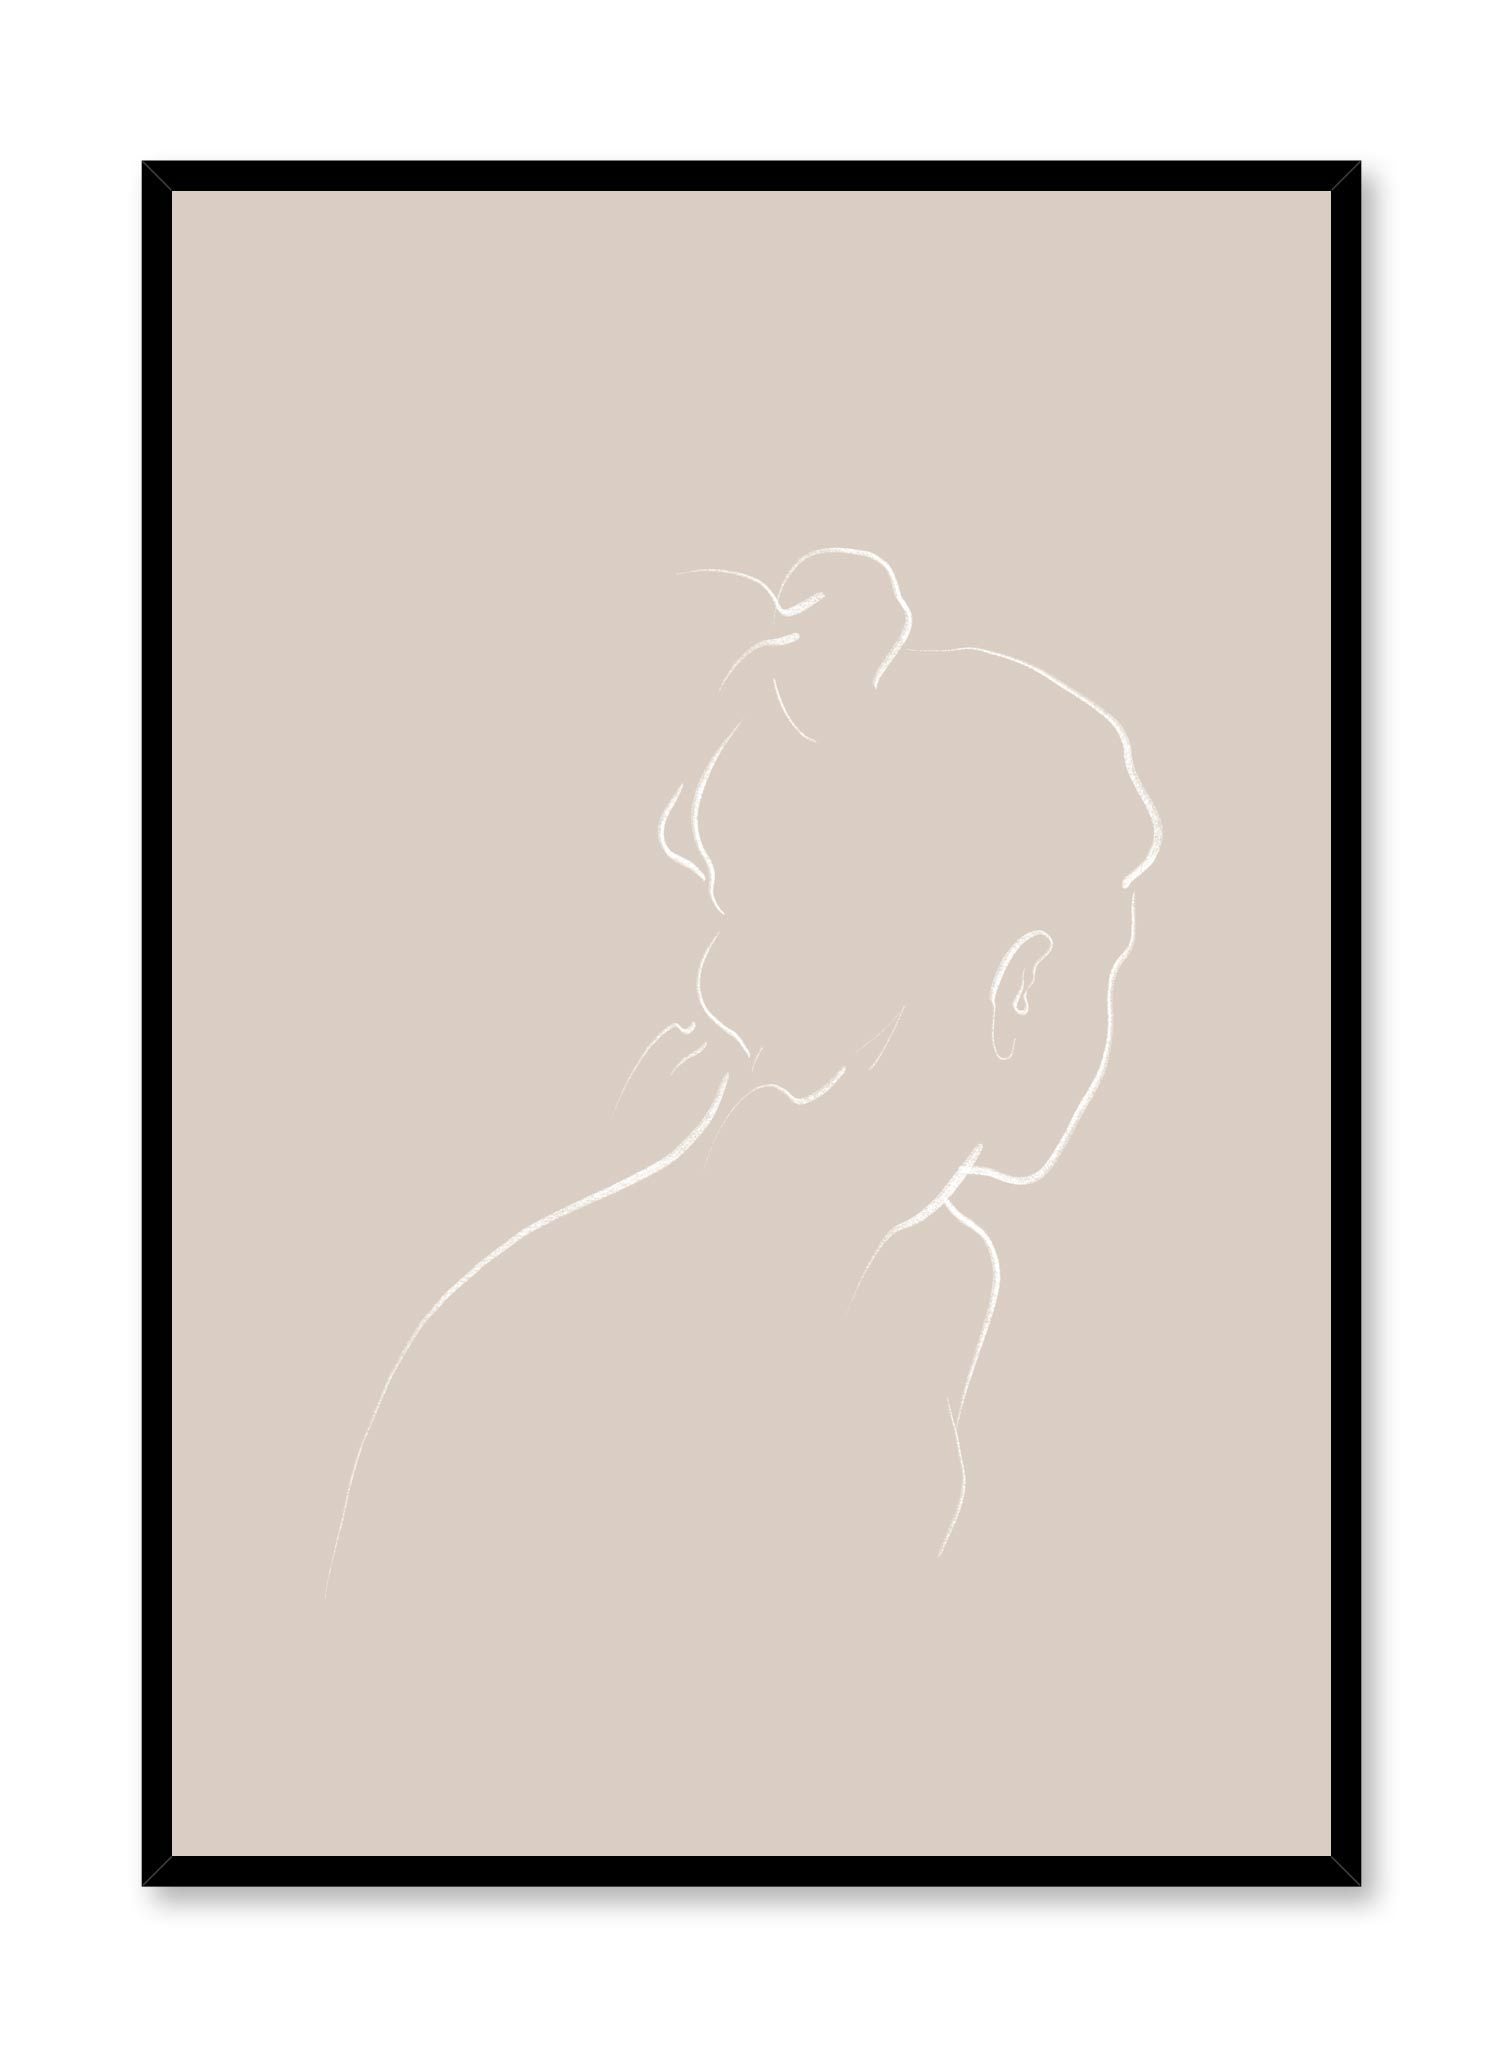 Modern minimalist poster by Opposite Wall with abstract illustration of Into the Distance with beige background